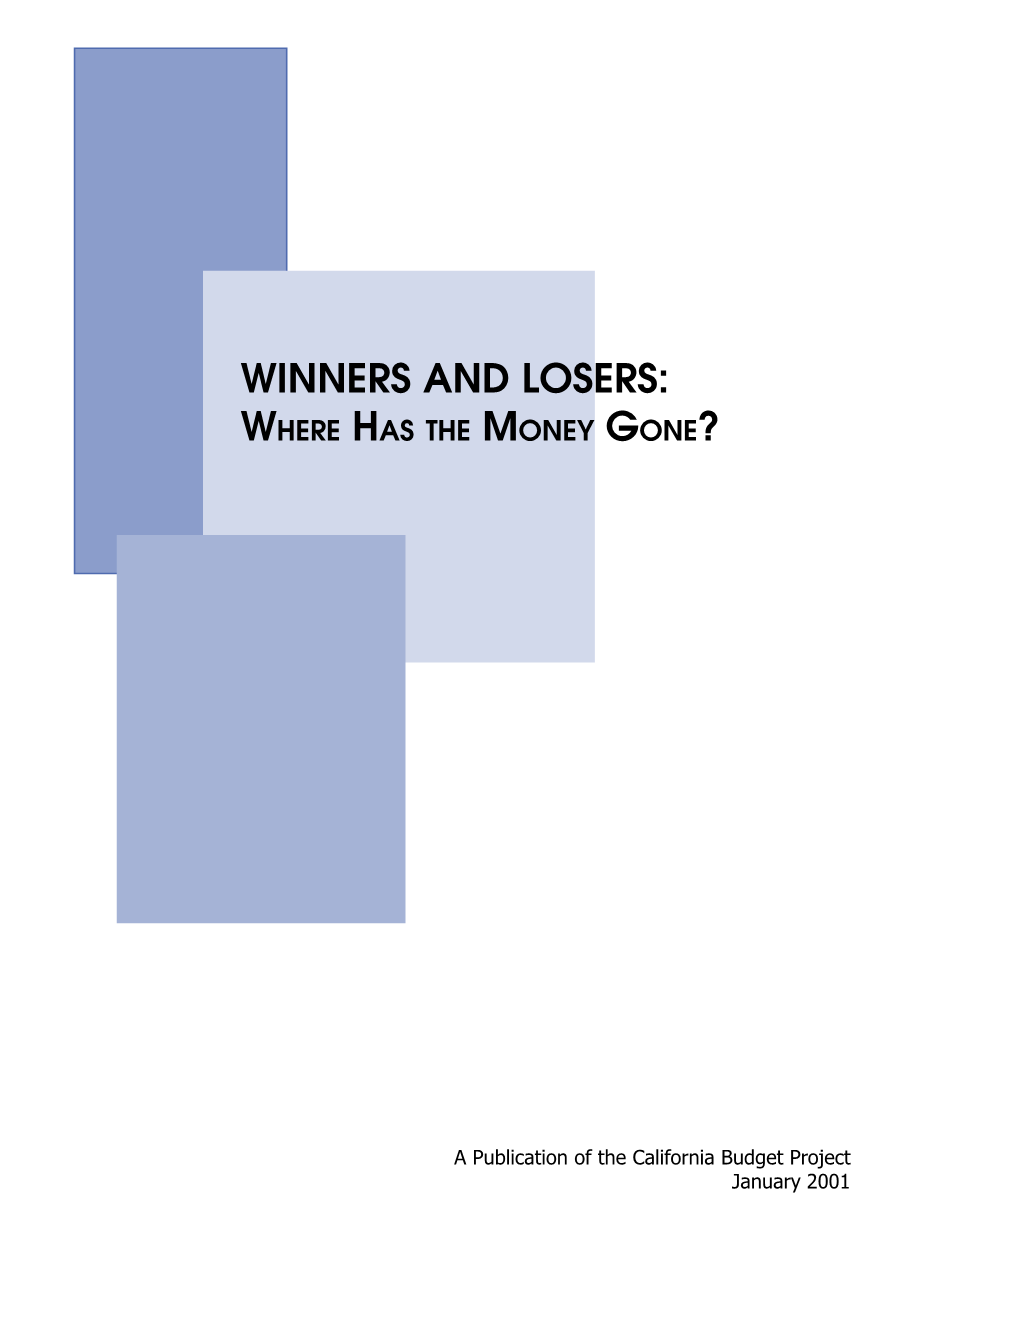 Winners and Losers: Where Has the Money Gone?